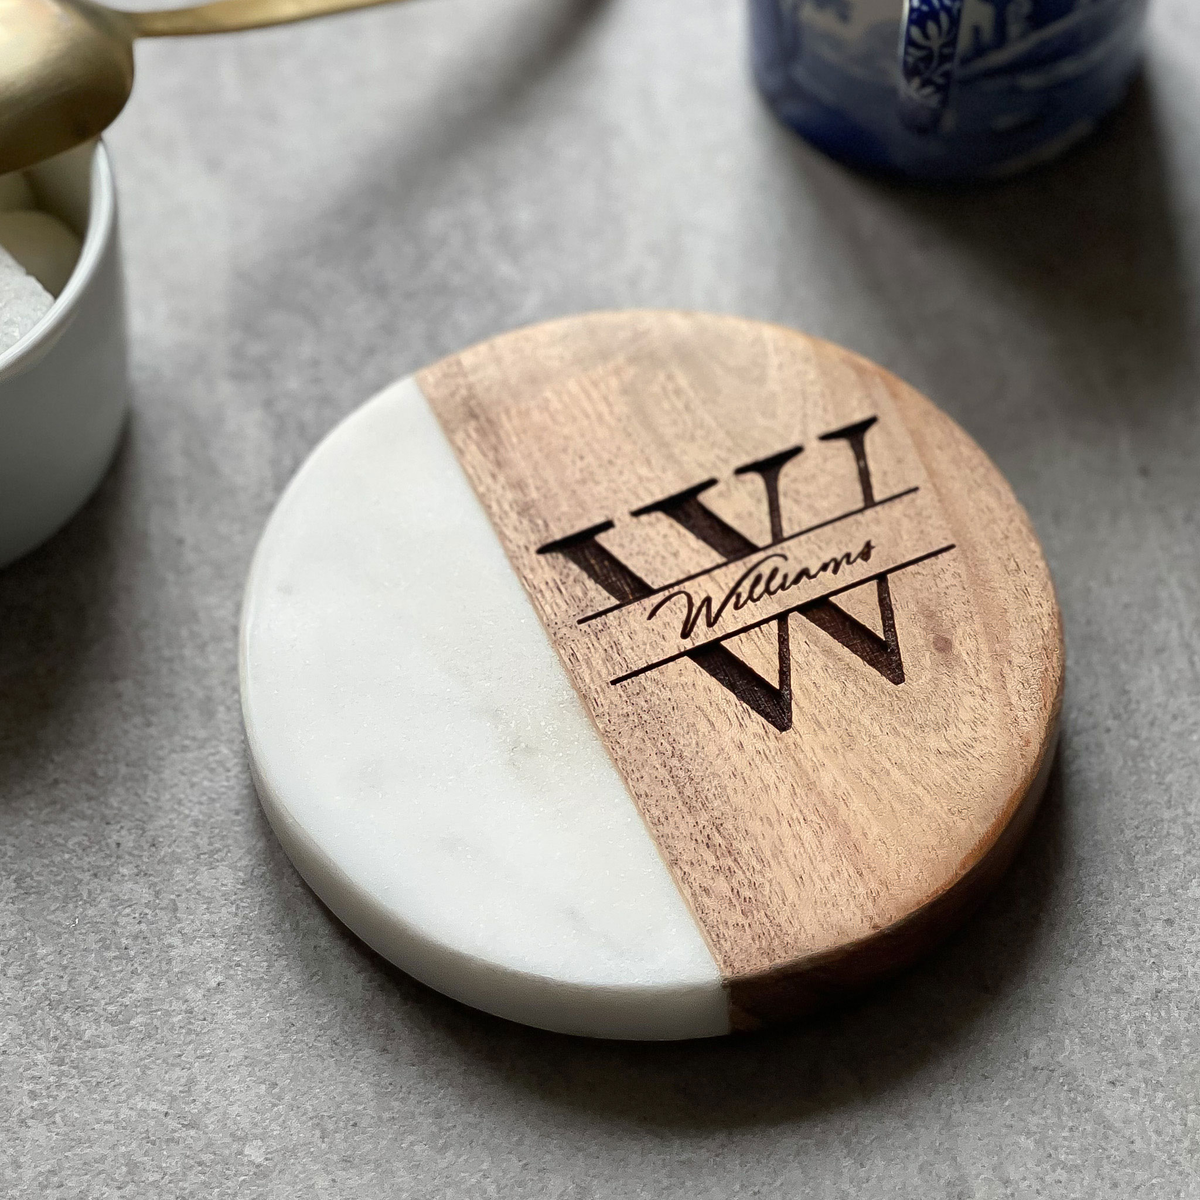  Custom Coasters for Drinks Personalized Engraved Coasters  Wedding Gift Coaster Set of 2 Bar Coasters Hexagon Coasters Friends Acacia  Marble Coasters Newly Wed Gifts for The Couple : Home & Kitchen